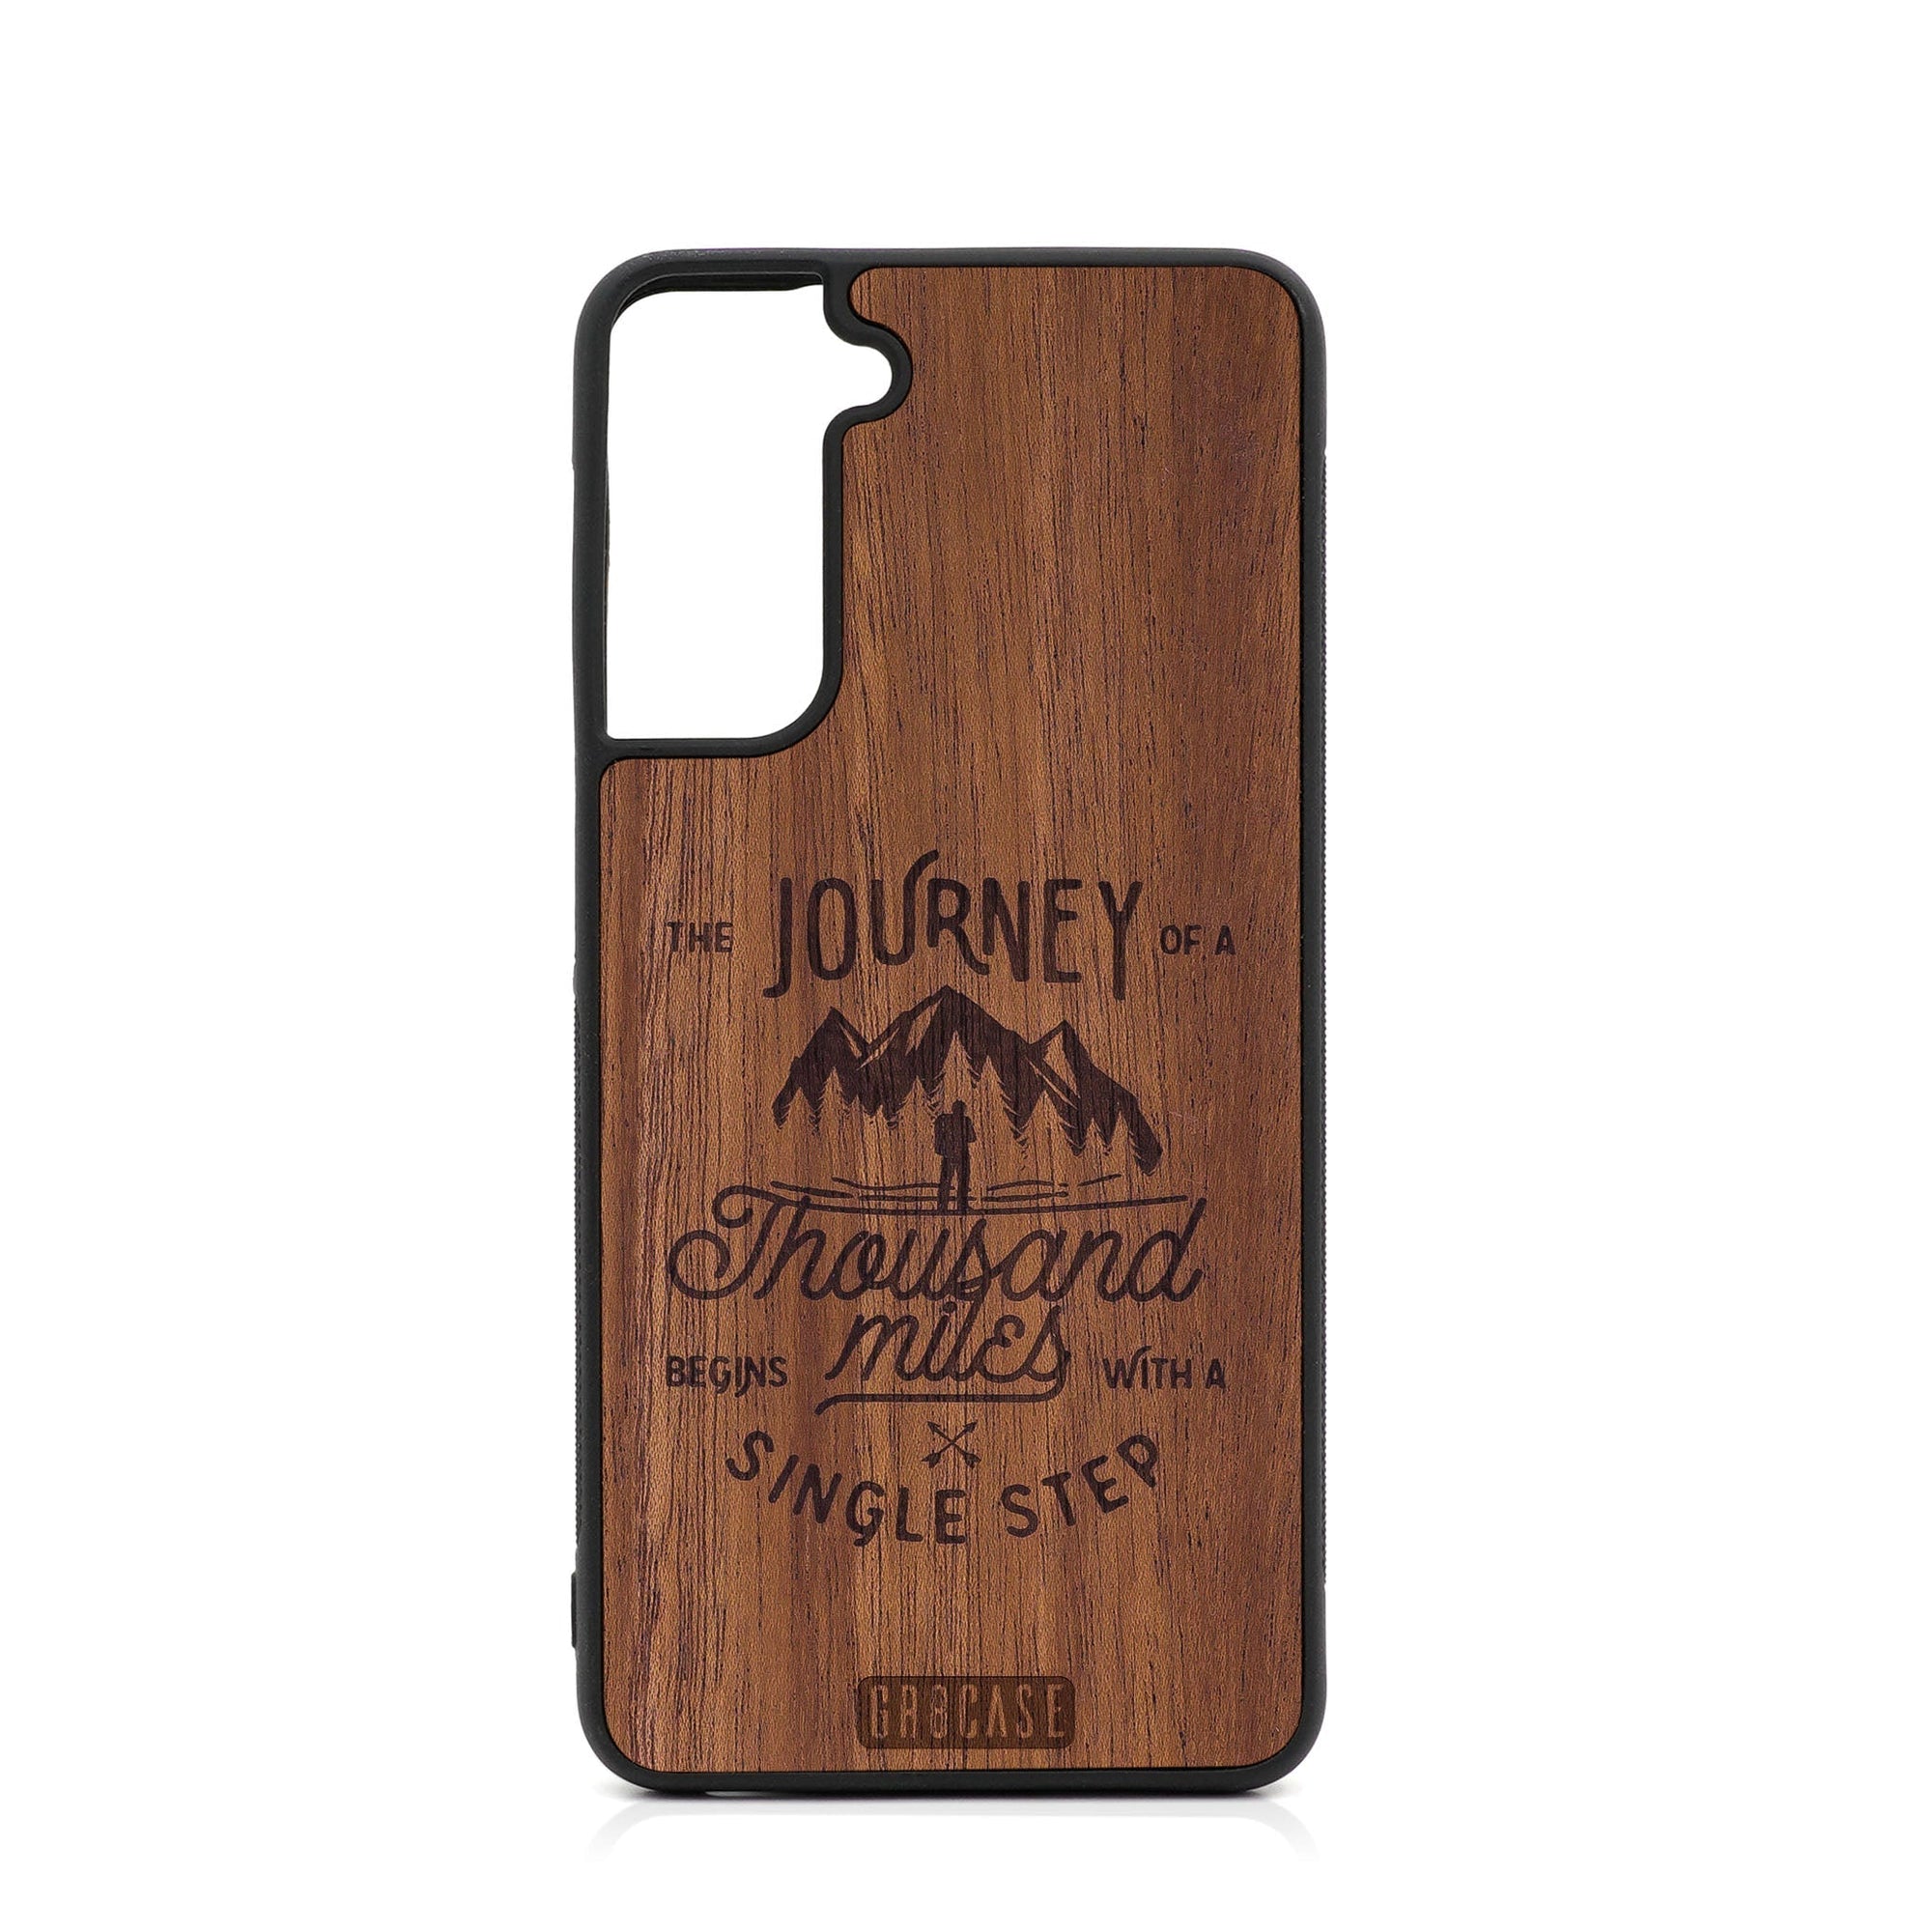 The Journey of A Thousand Miles Begins With A Single Step Design Wood Case For Samsung Galaxy S23 5G